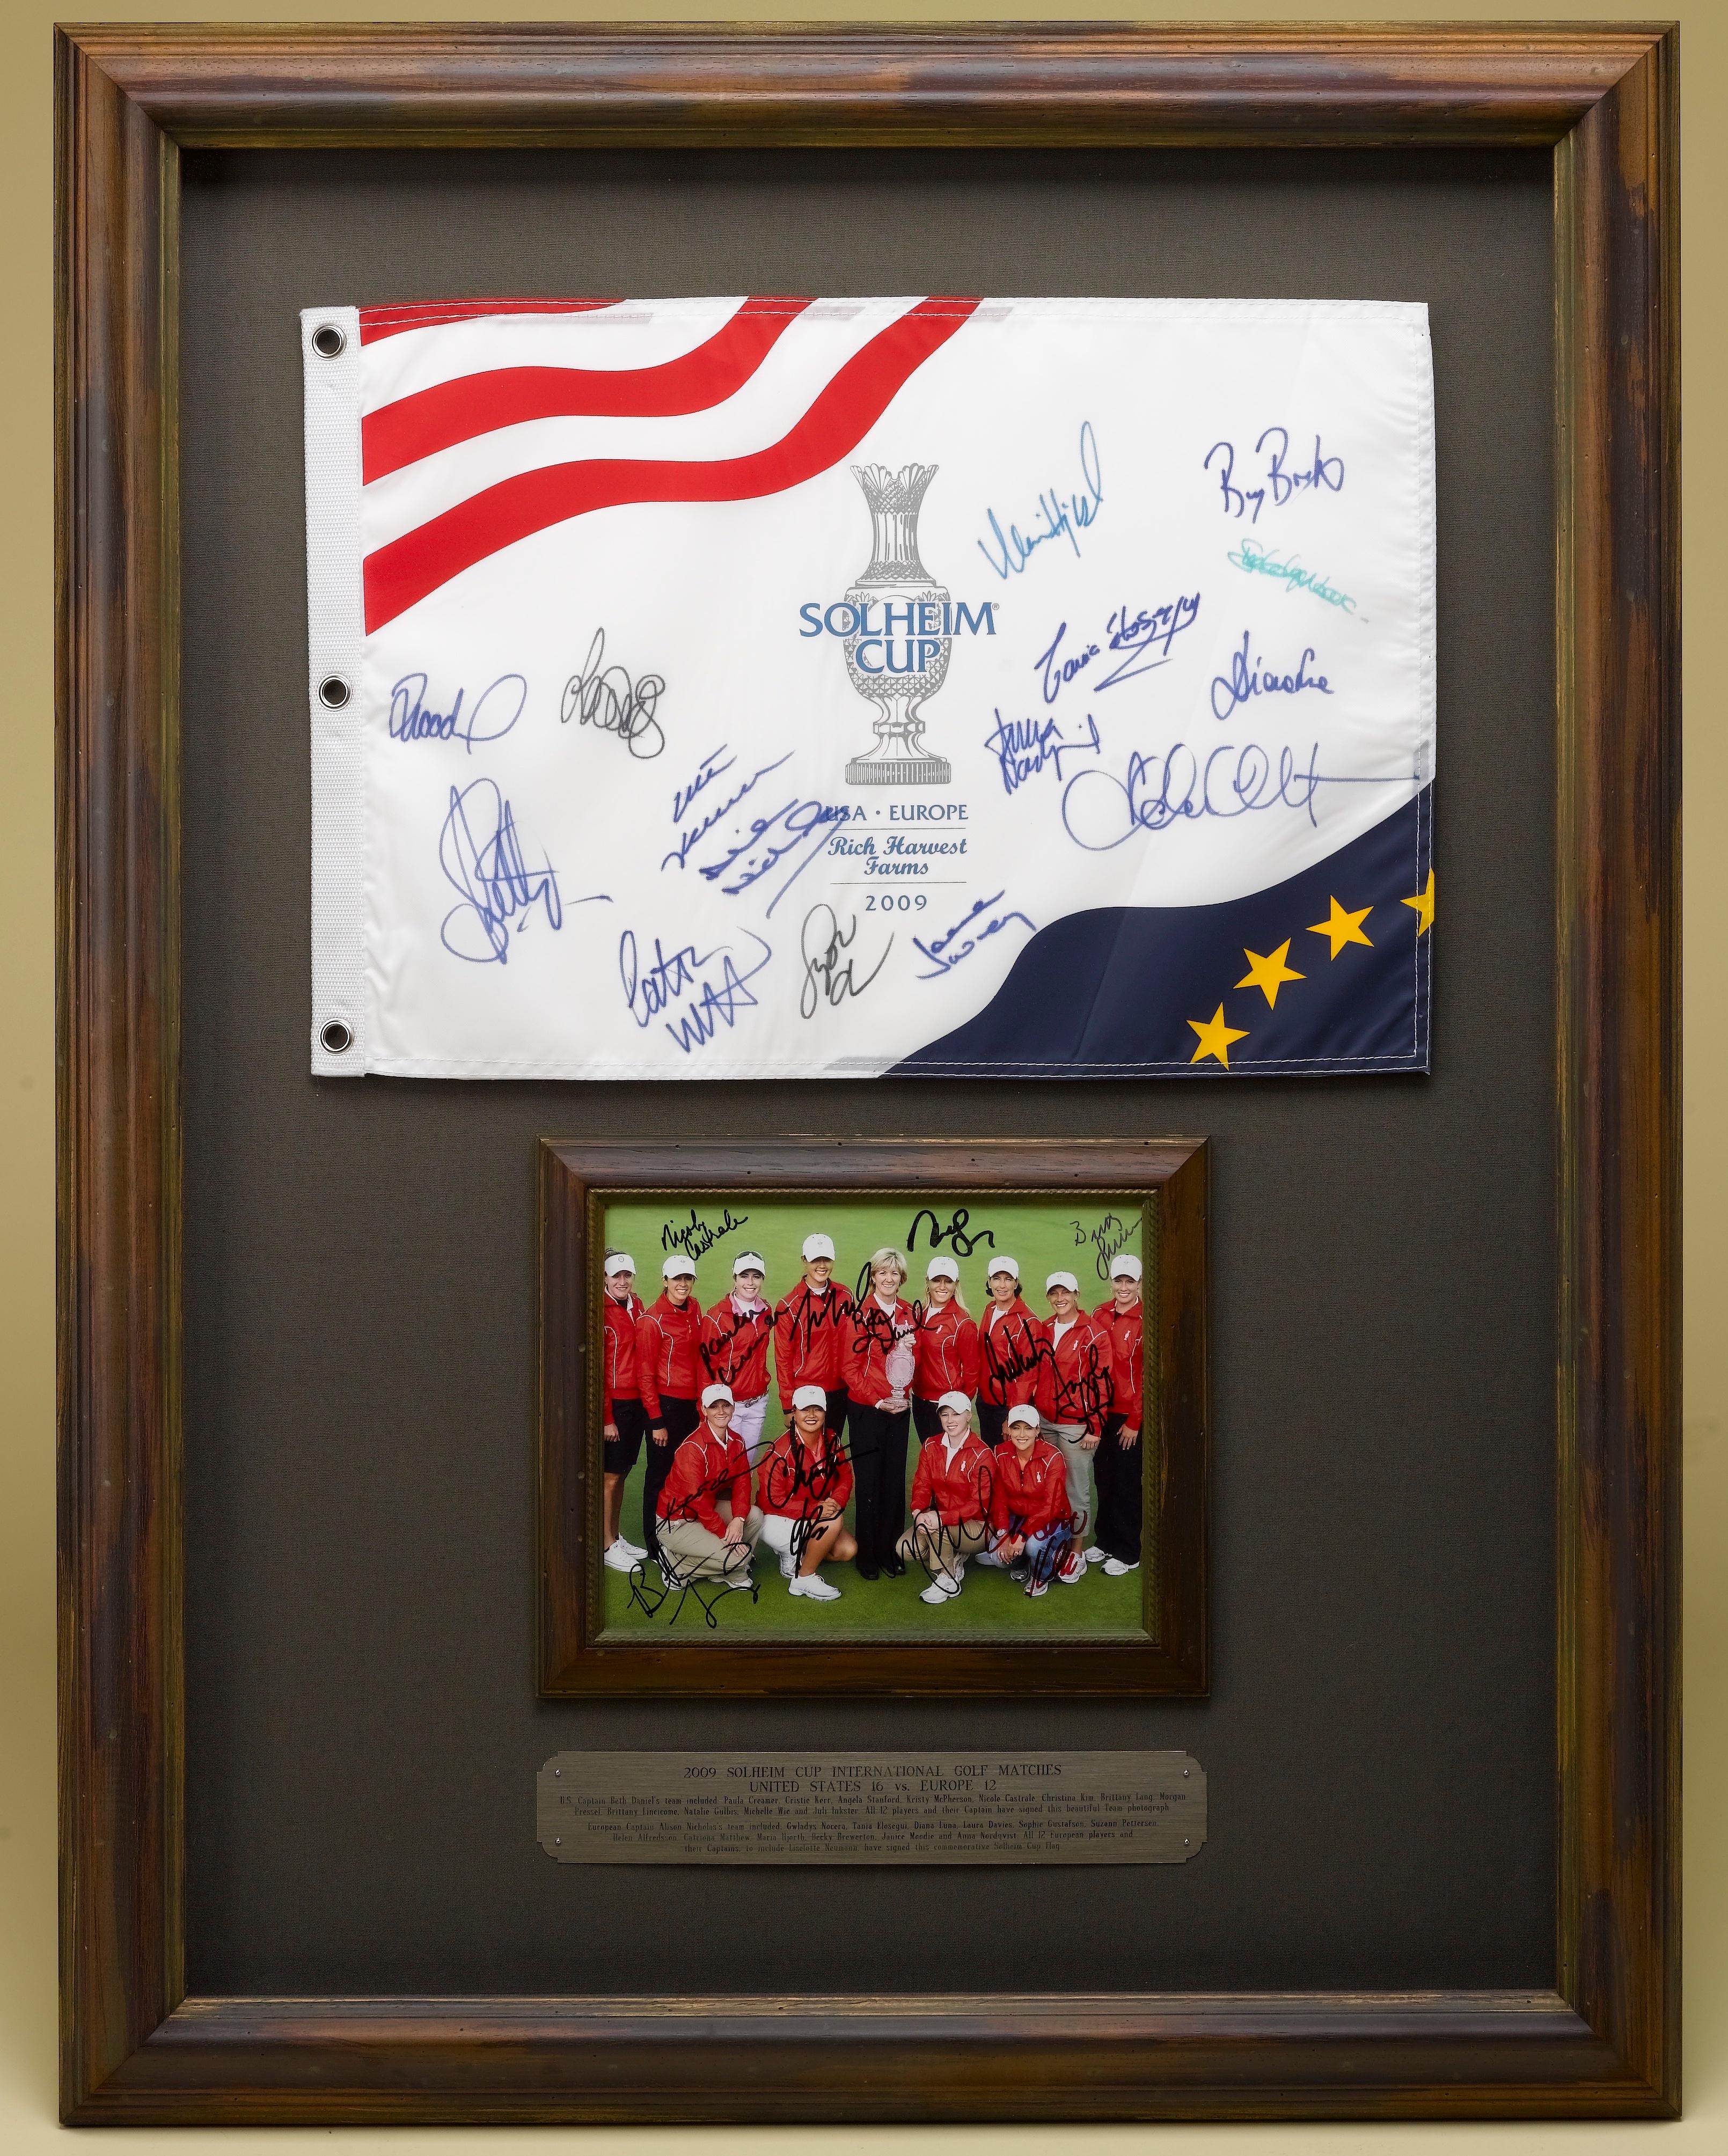 Fabric Solheim Cup Matches U.S. & European Team Signed Photo & Flag, 2009 For Sale